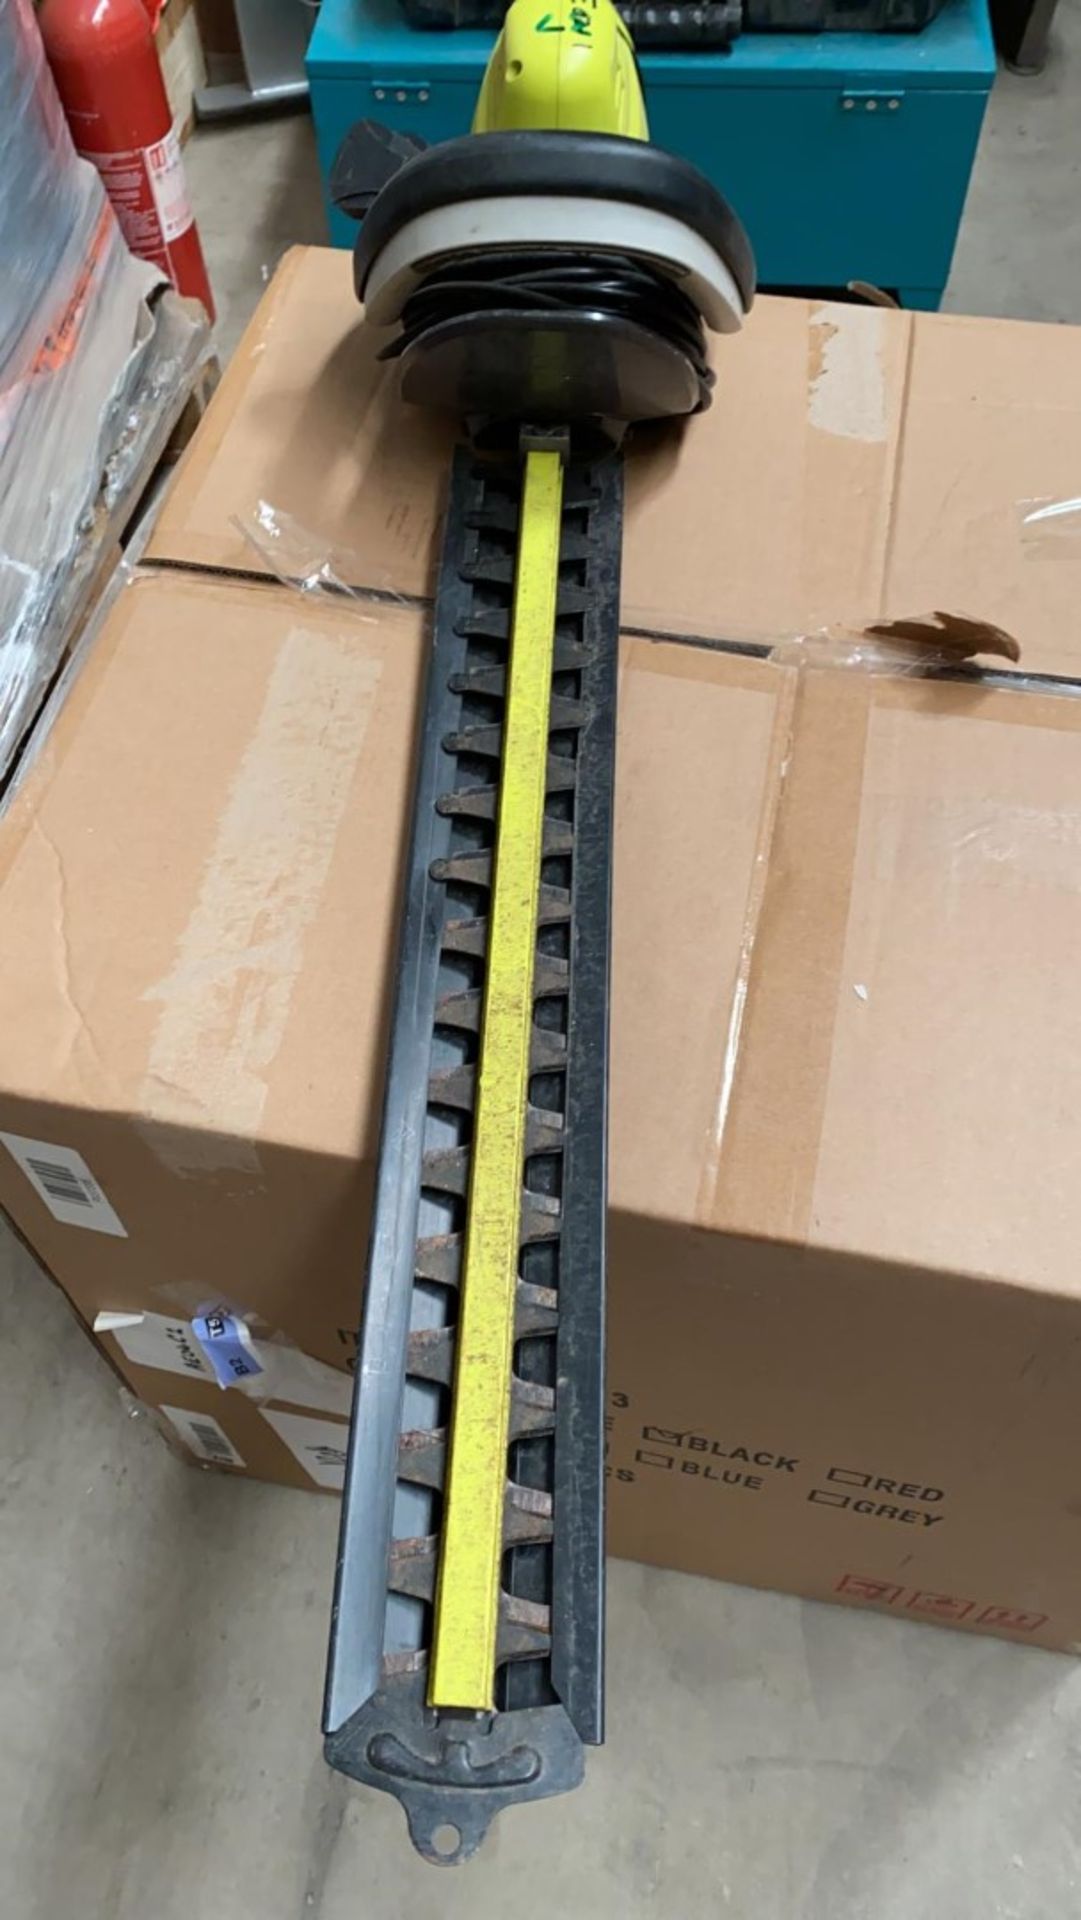 1 x Ryobi Electric Hedge Trimmer - Used, Recently Removed From A Working Site - CL505 - Ref: TL037 -